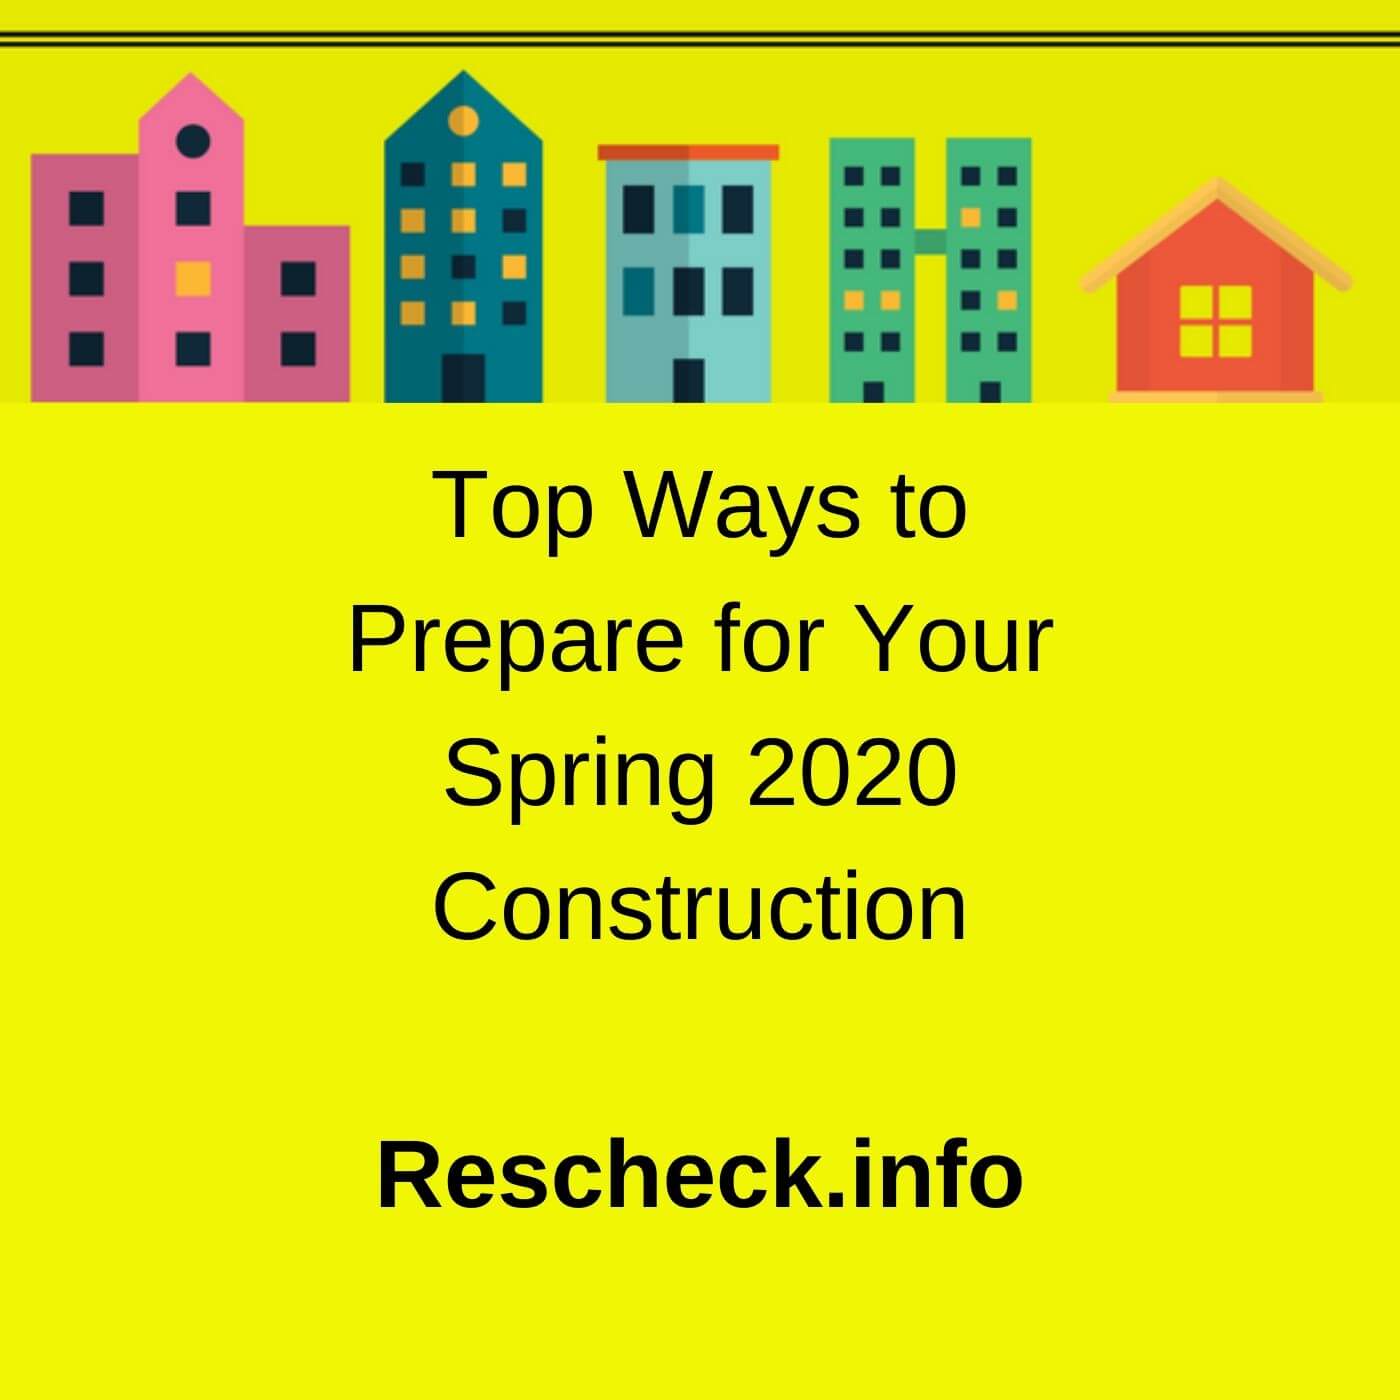 Top Ways to Prepare for Your Spring 2020 Construction